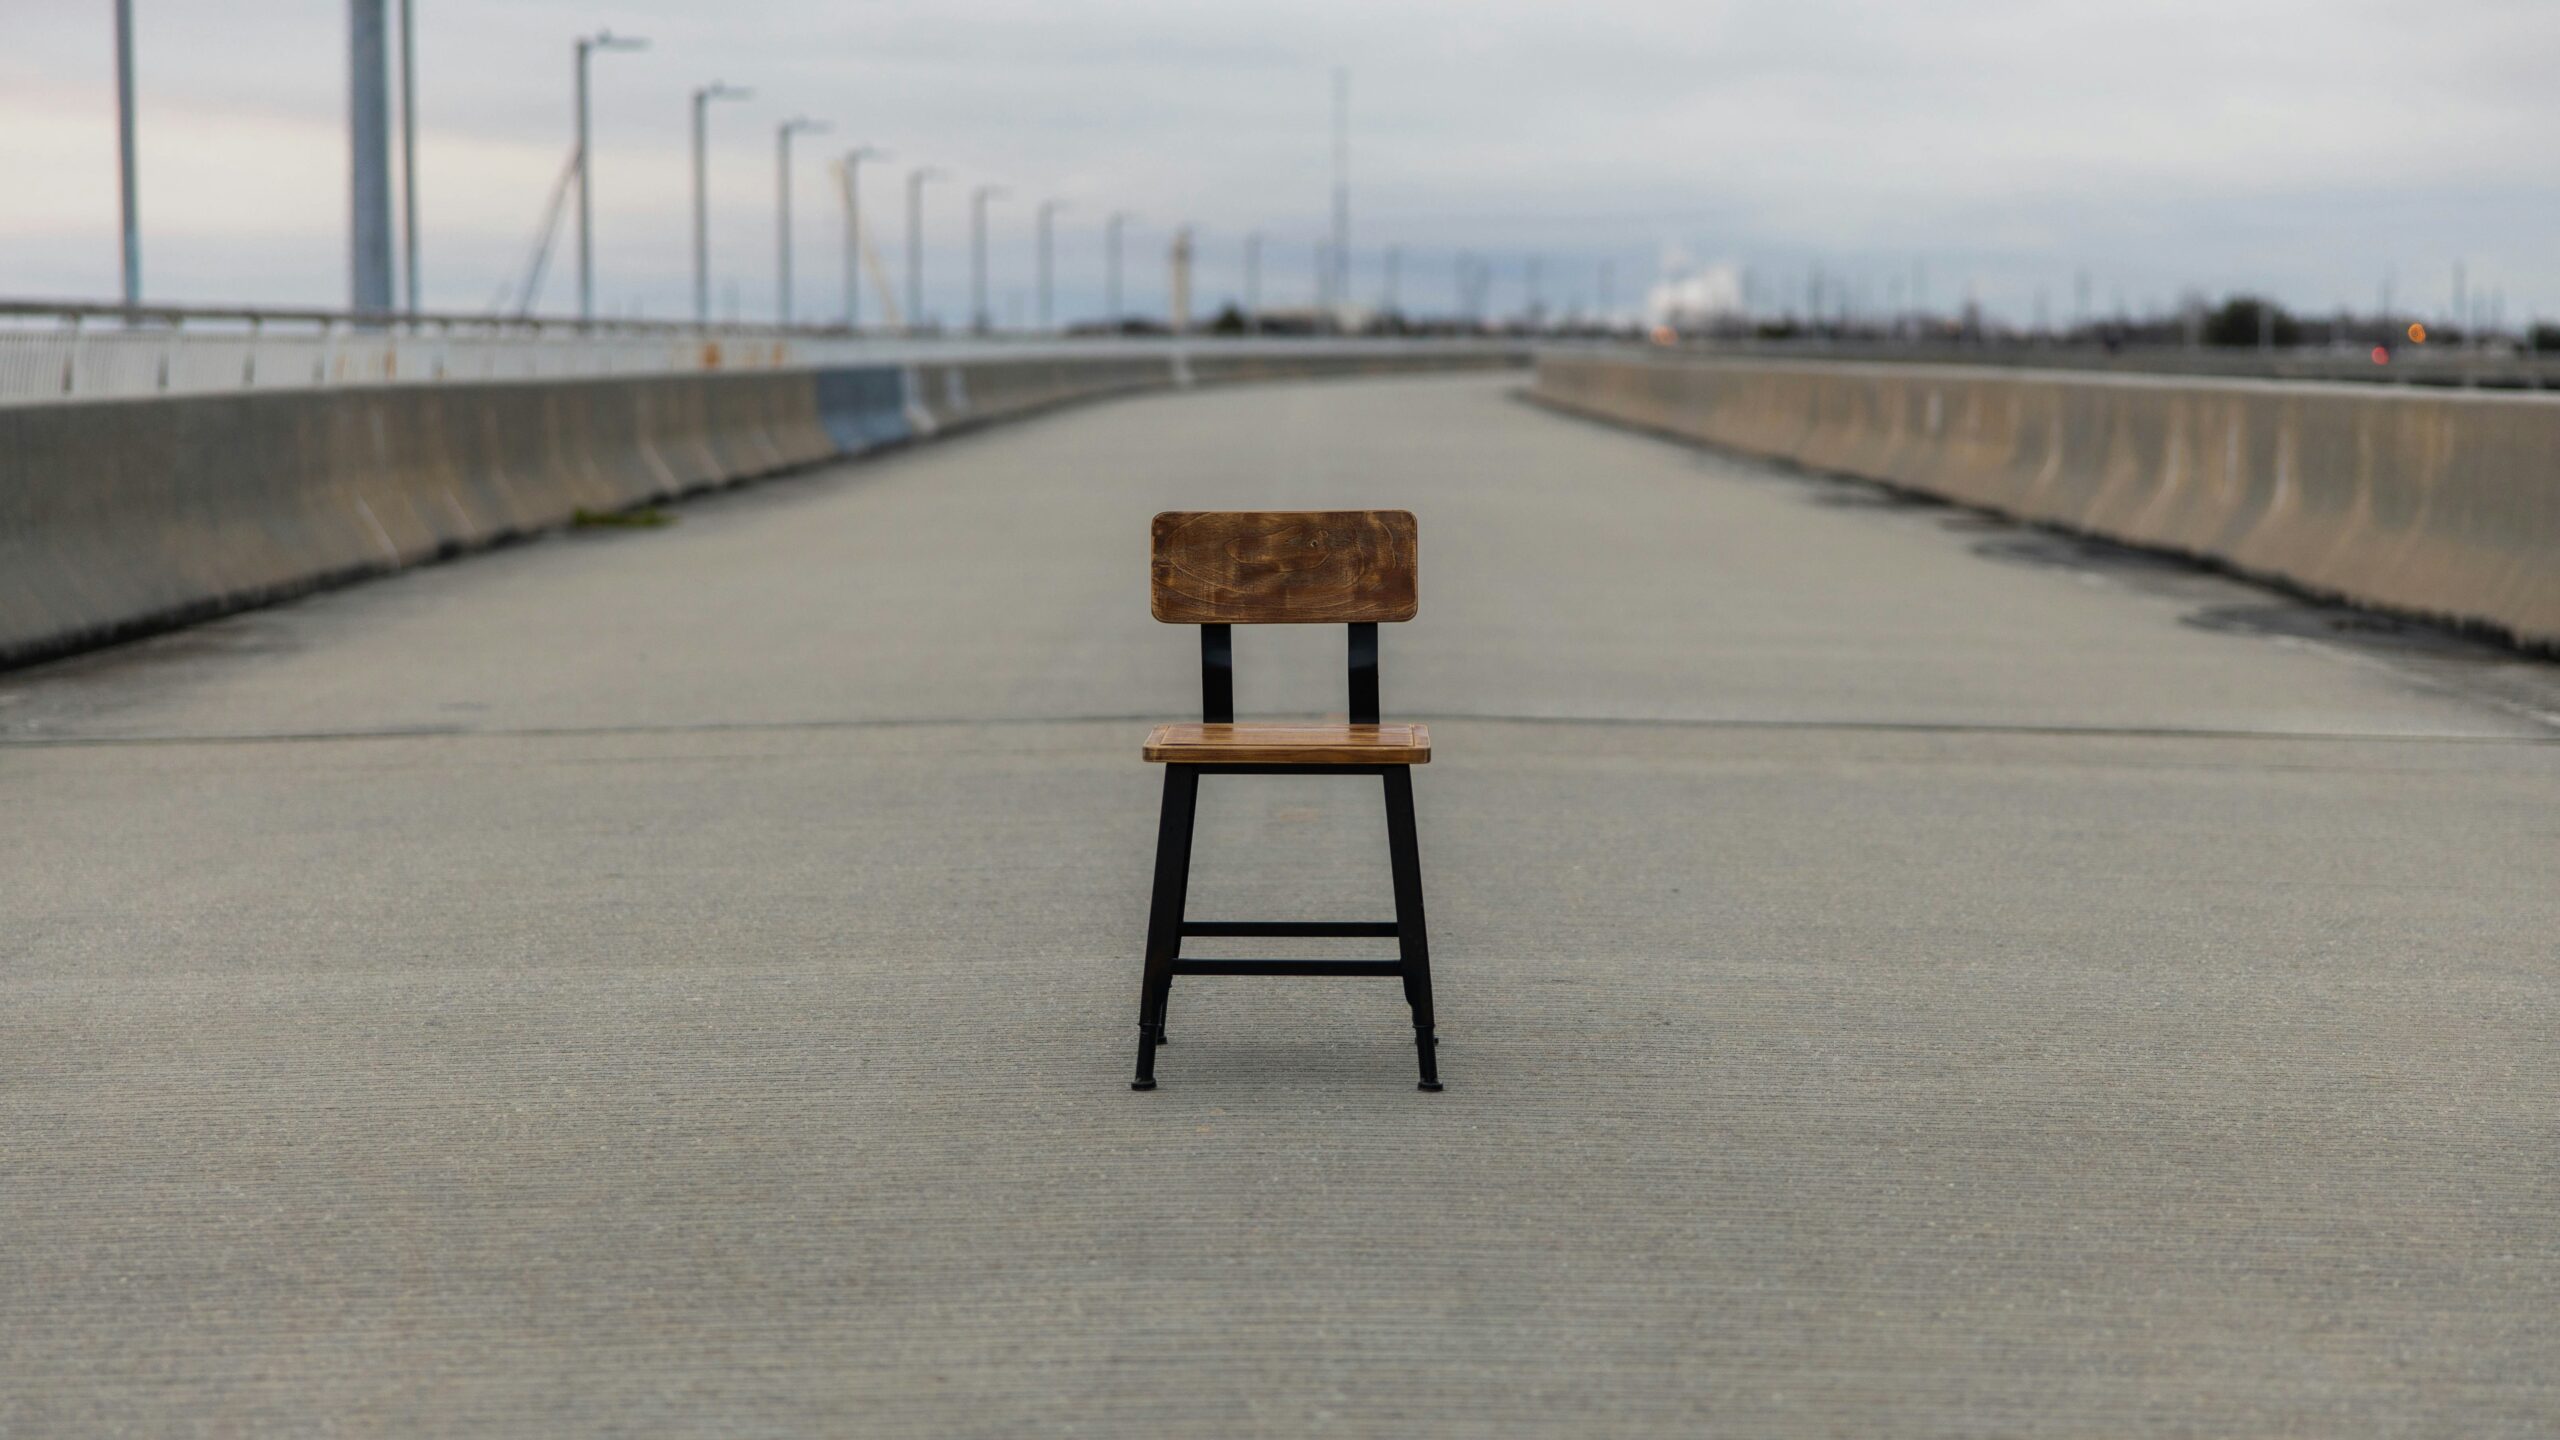 Empty chair on deserted highway.